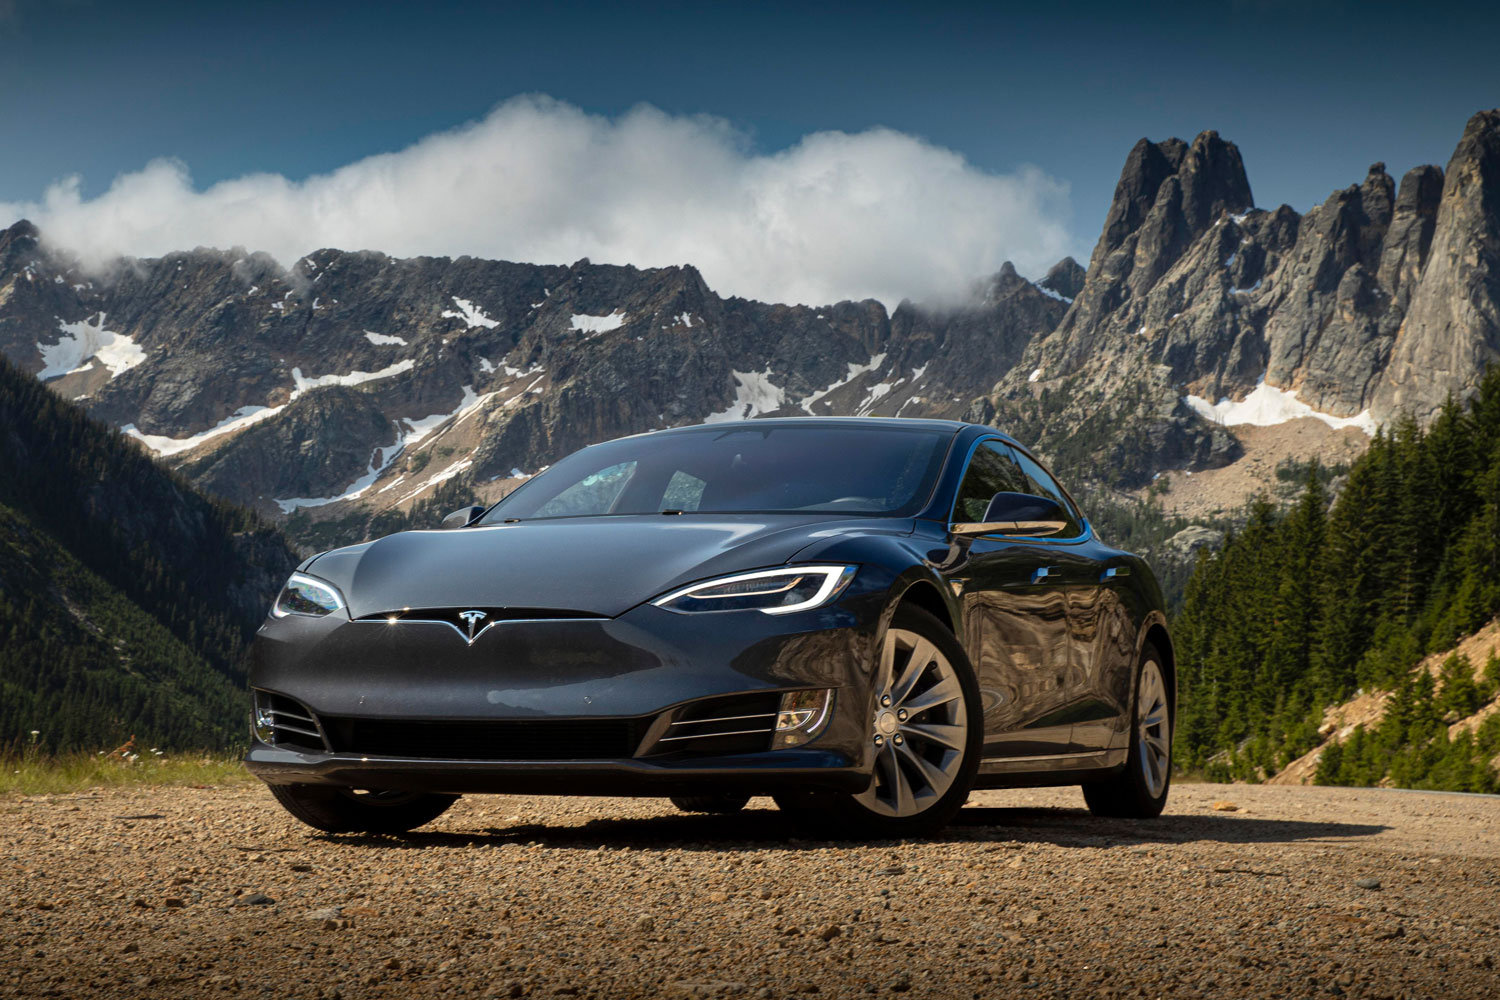 Photograph of a Tesla model 3 in front of a mountain in the wilderness of Canada.